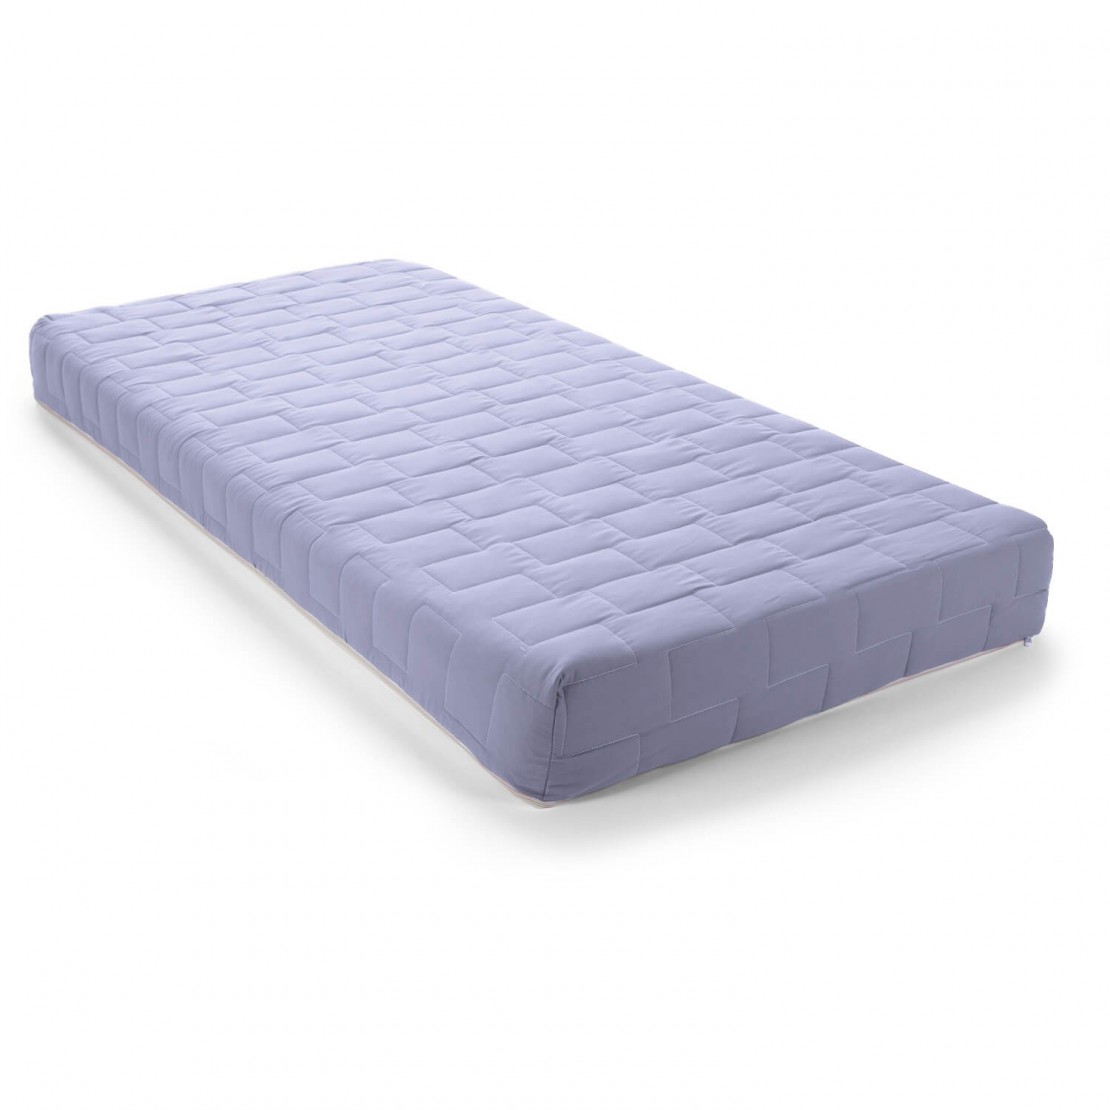 /_images/product-photos/visco-therapy-jazz-coil-spring-mattress-a.jpg